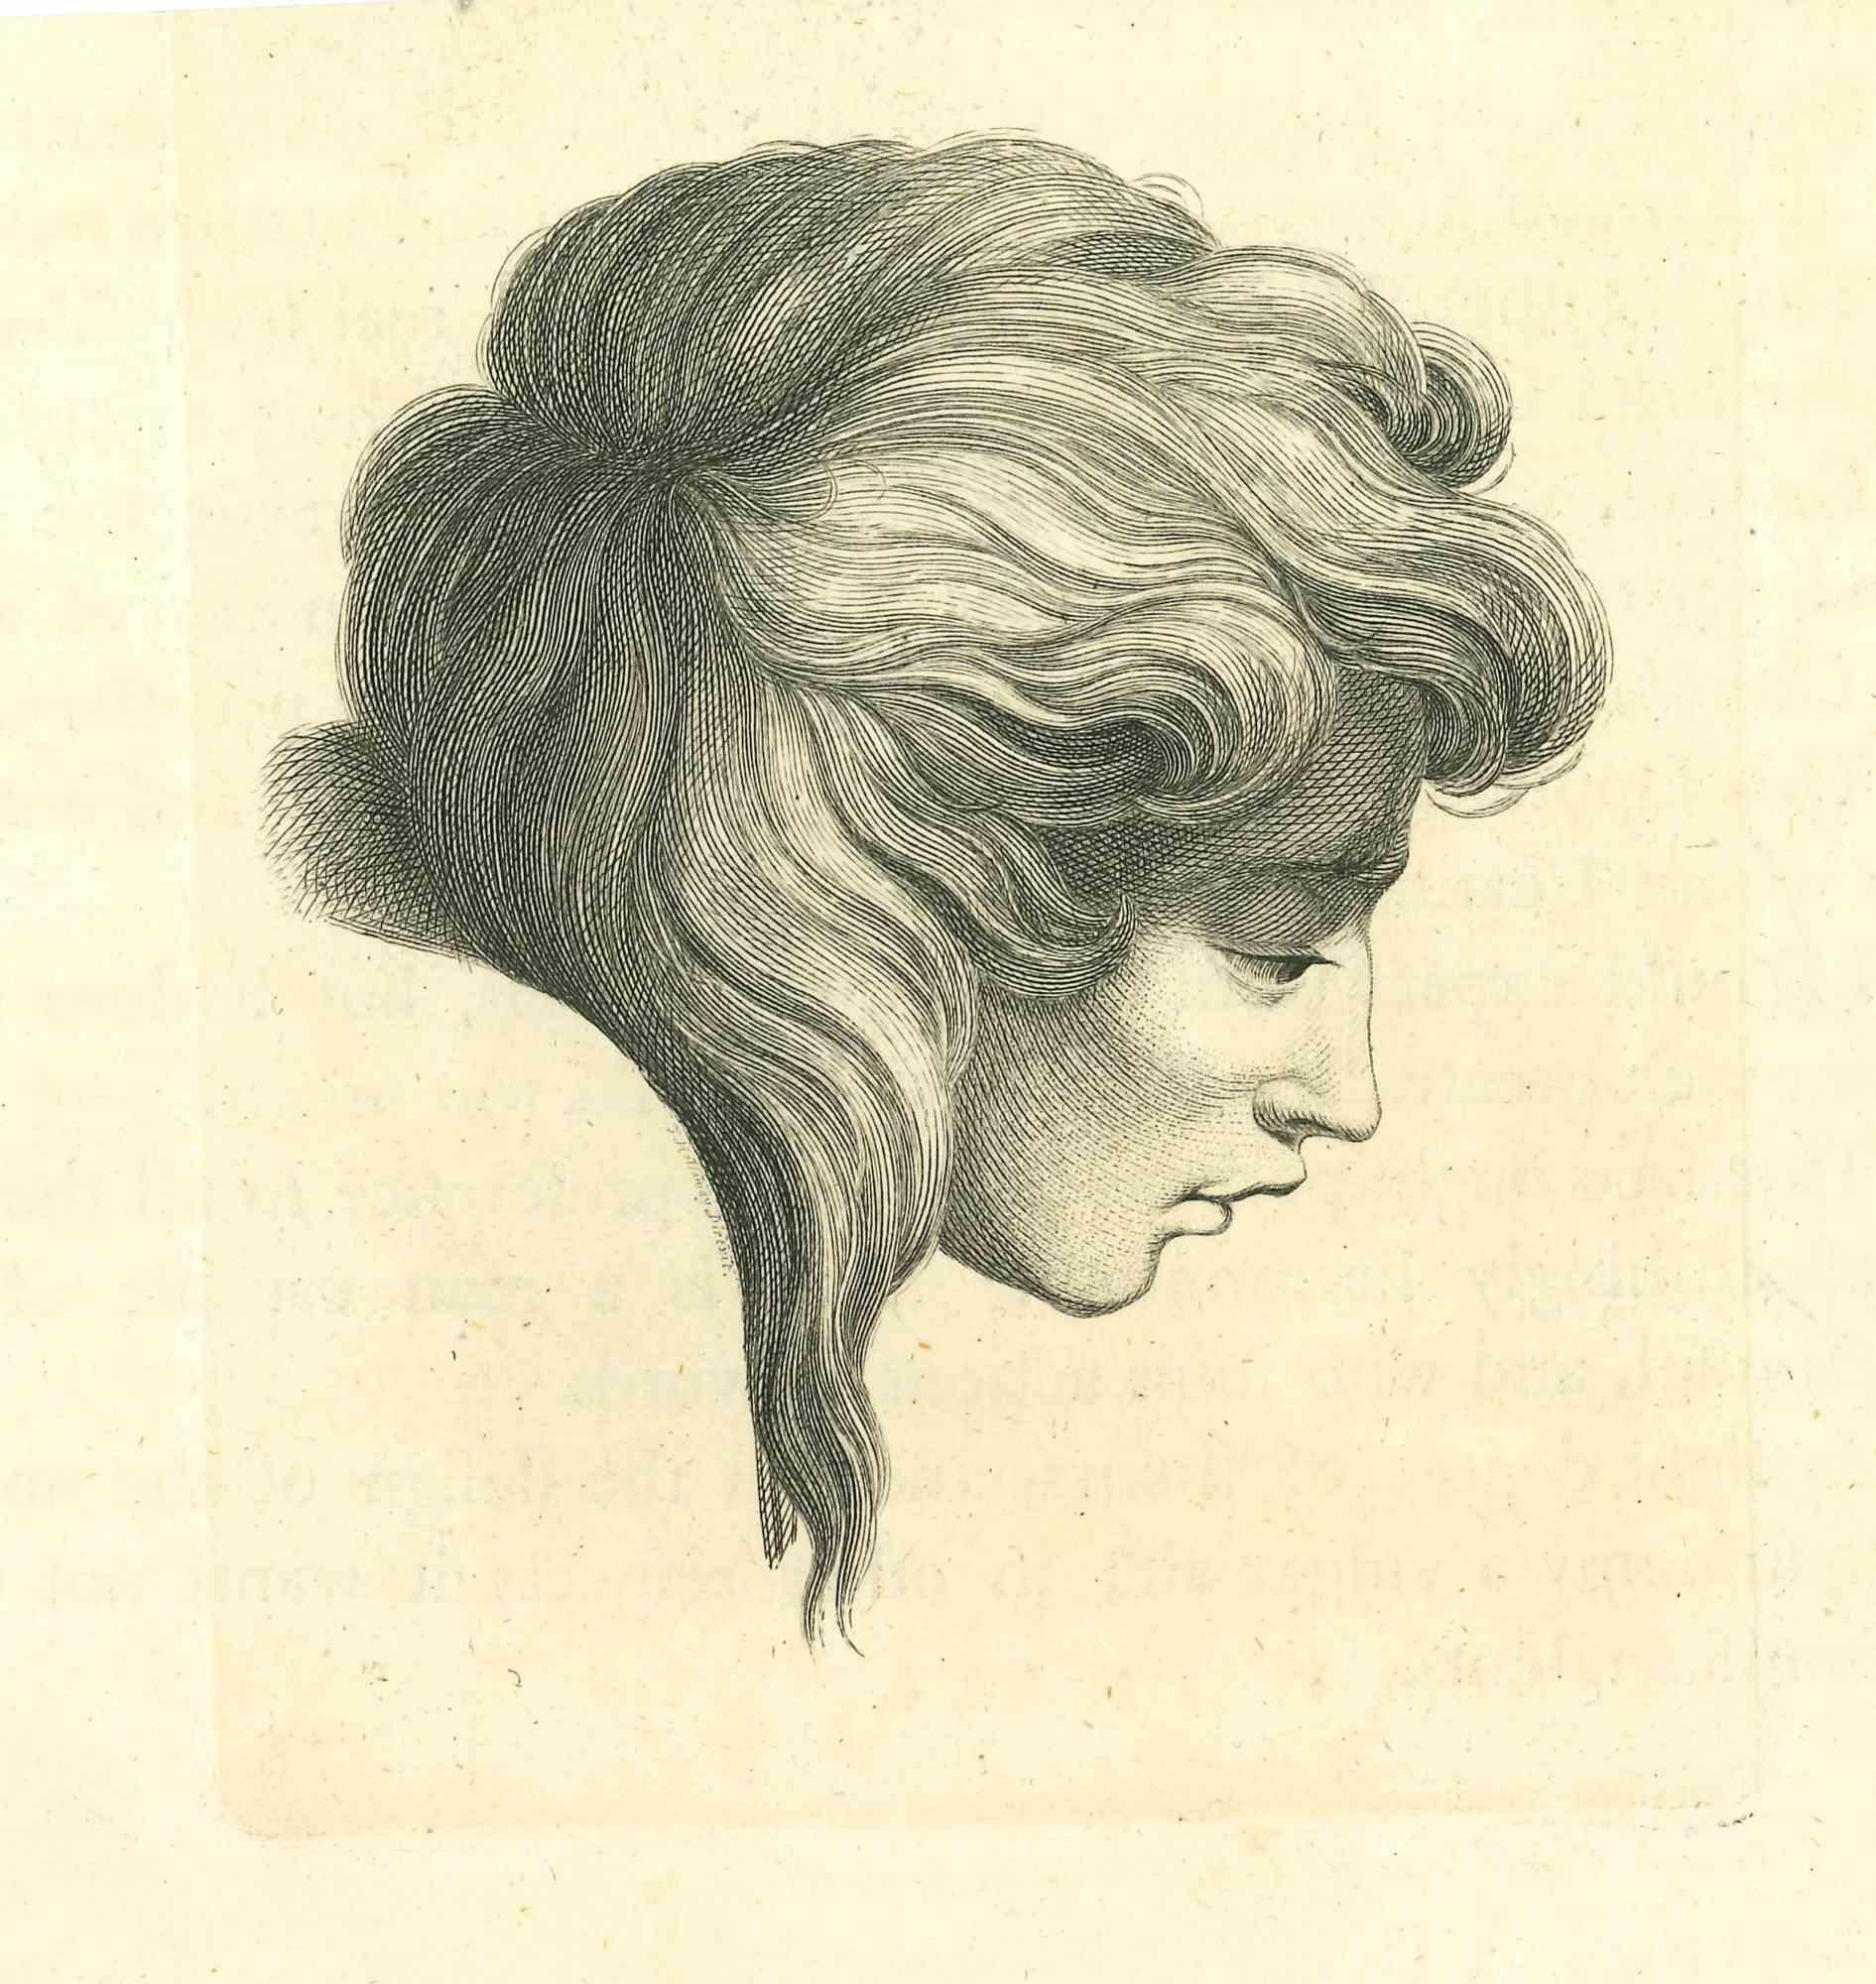 Profile Of A Woman is an original etching artwork realized by Thomas Holloway for Johann Caspar Lavater's "Essays on Physiognomy, Designed to Promote the Knowledge and the Love of Mankind", London, Bensley, 1810. 

With the script on the rear.

Good